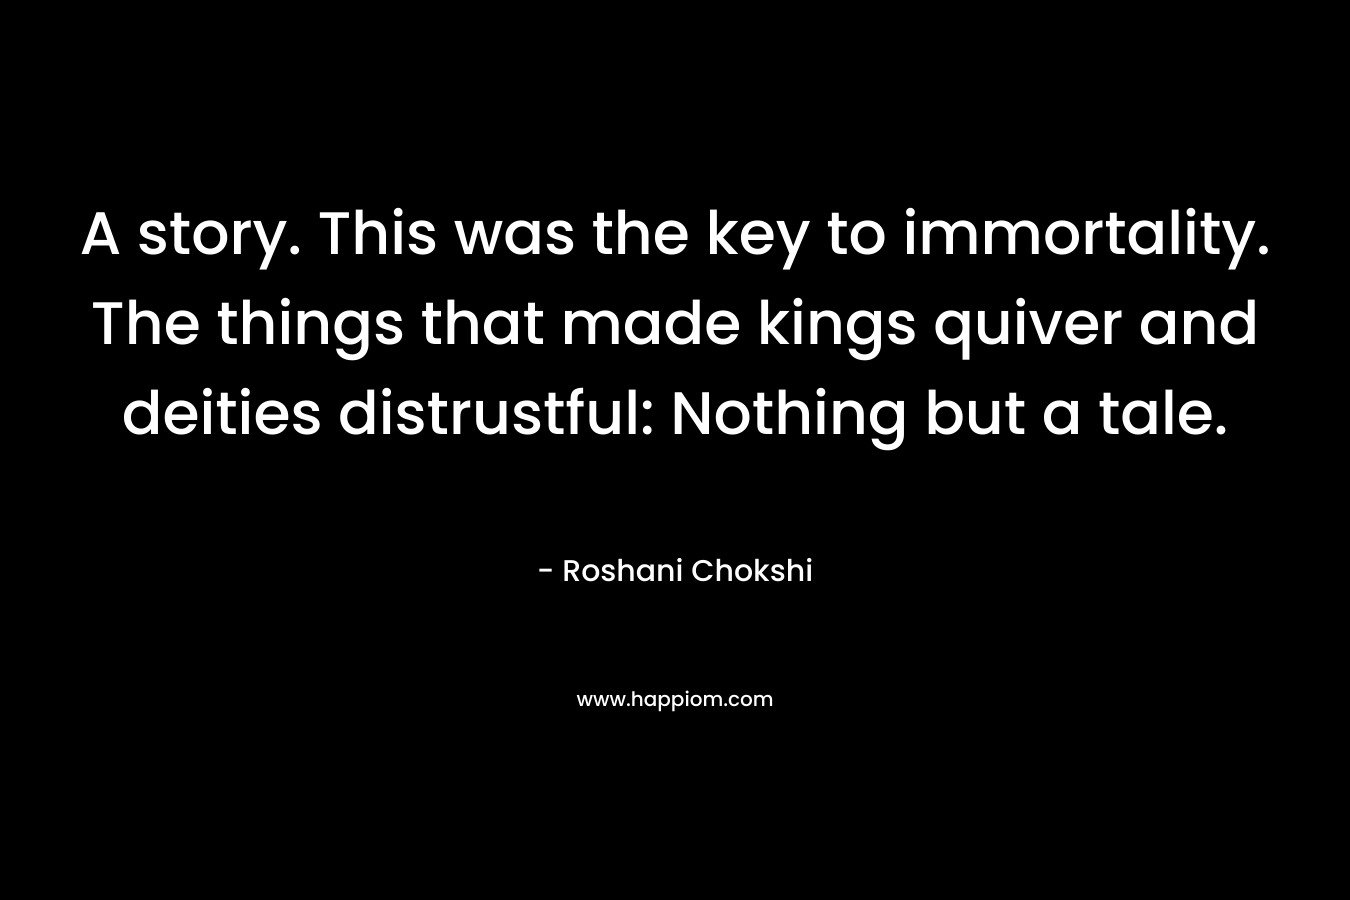 A story. This was the key to immortality. The things that made kings quiver and deities distrustful: Nothing but a tale. – Roshani Chokshi